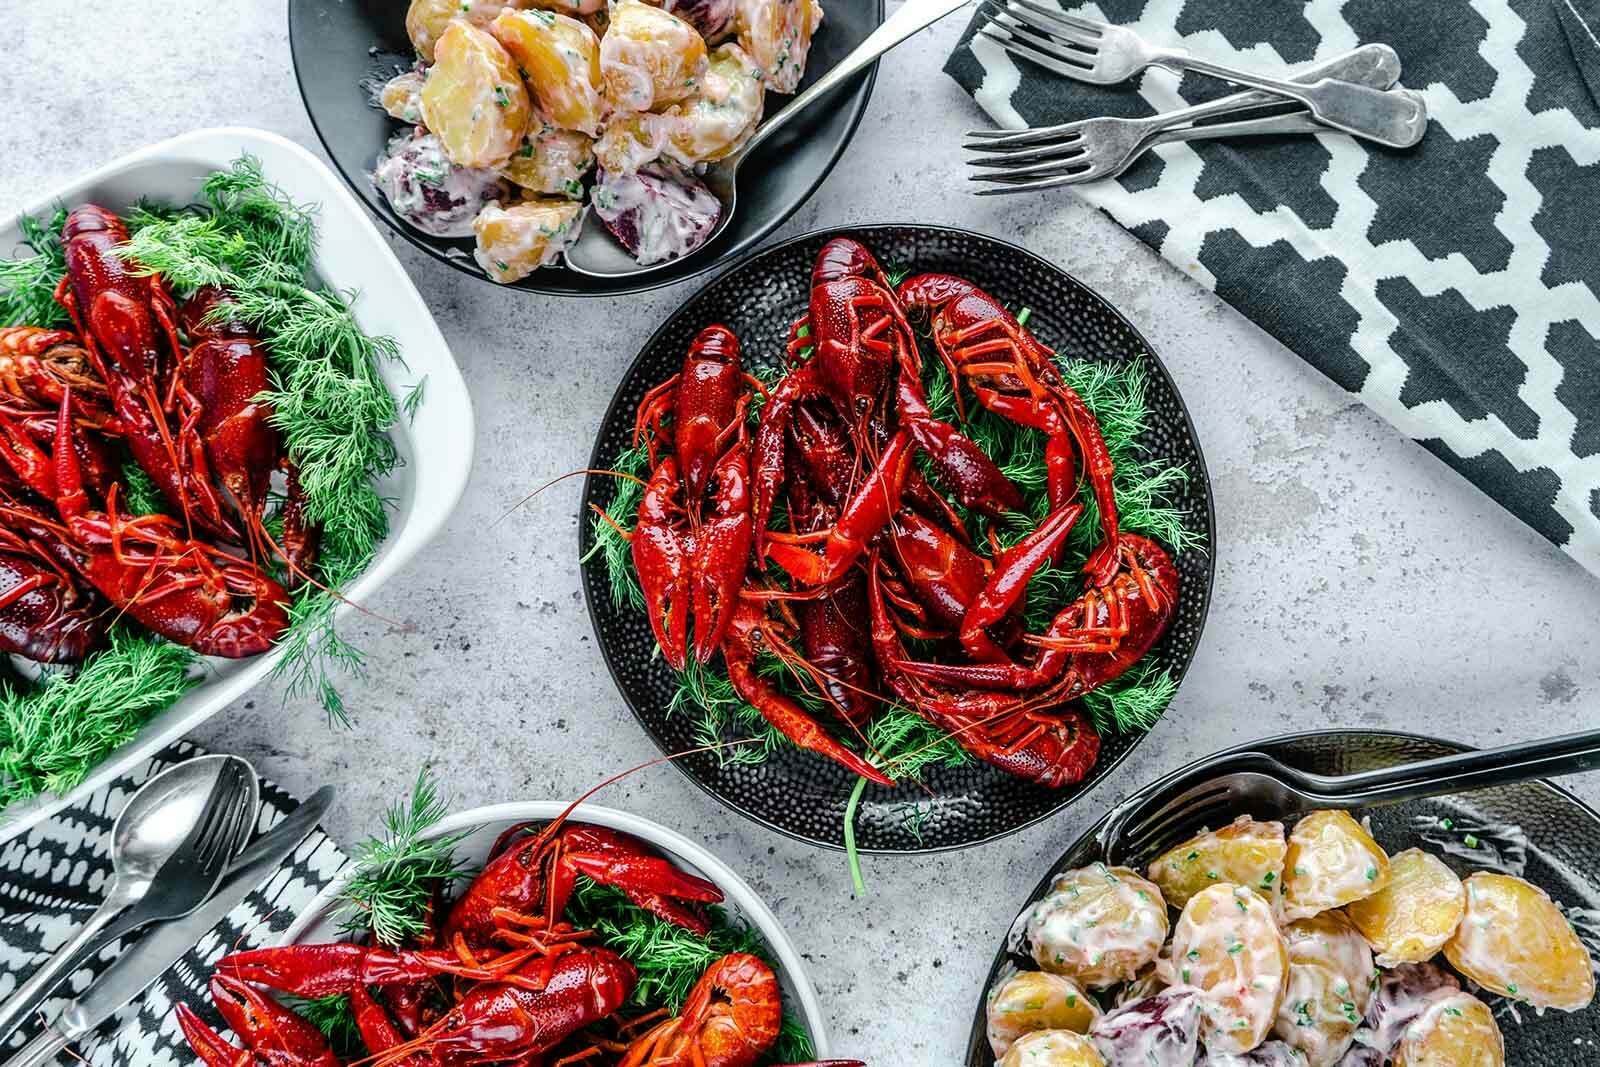 Crayfish party style with beetroot and potato salad